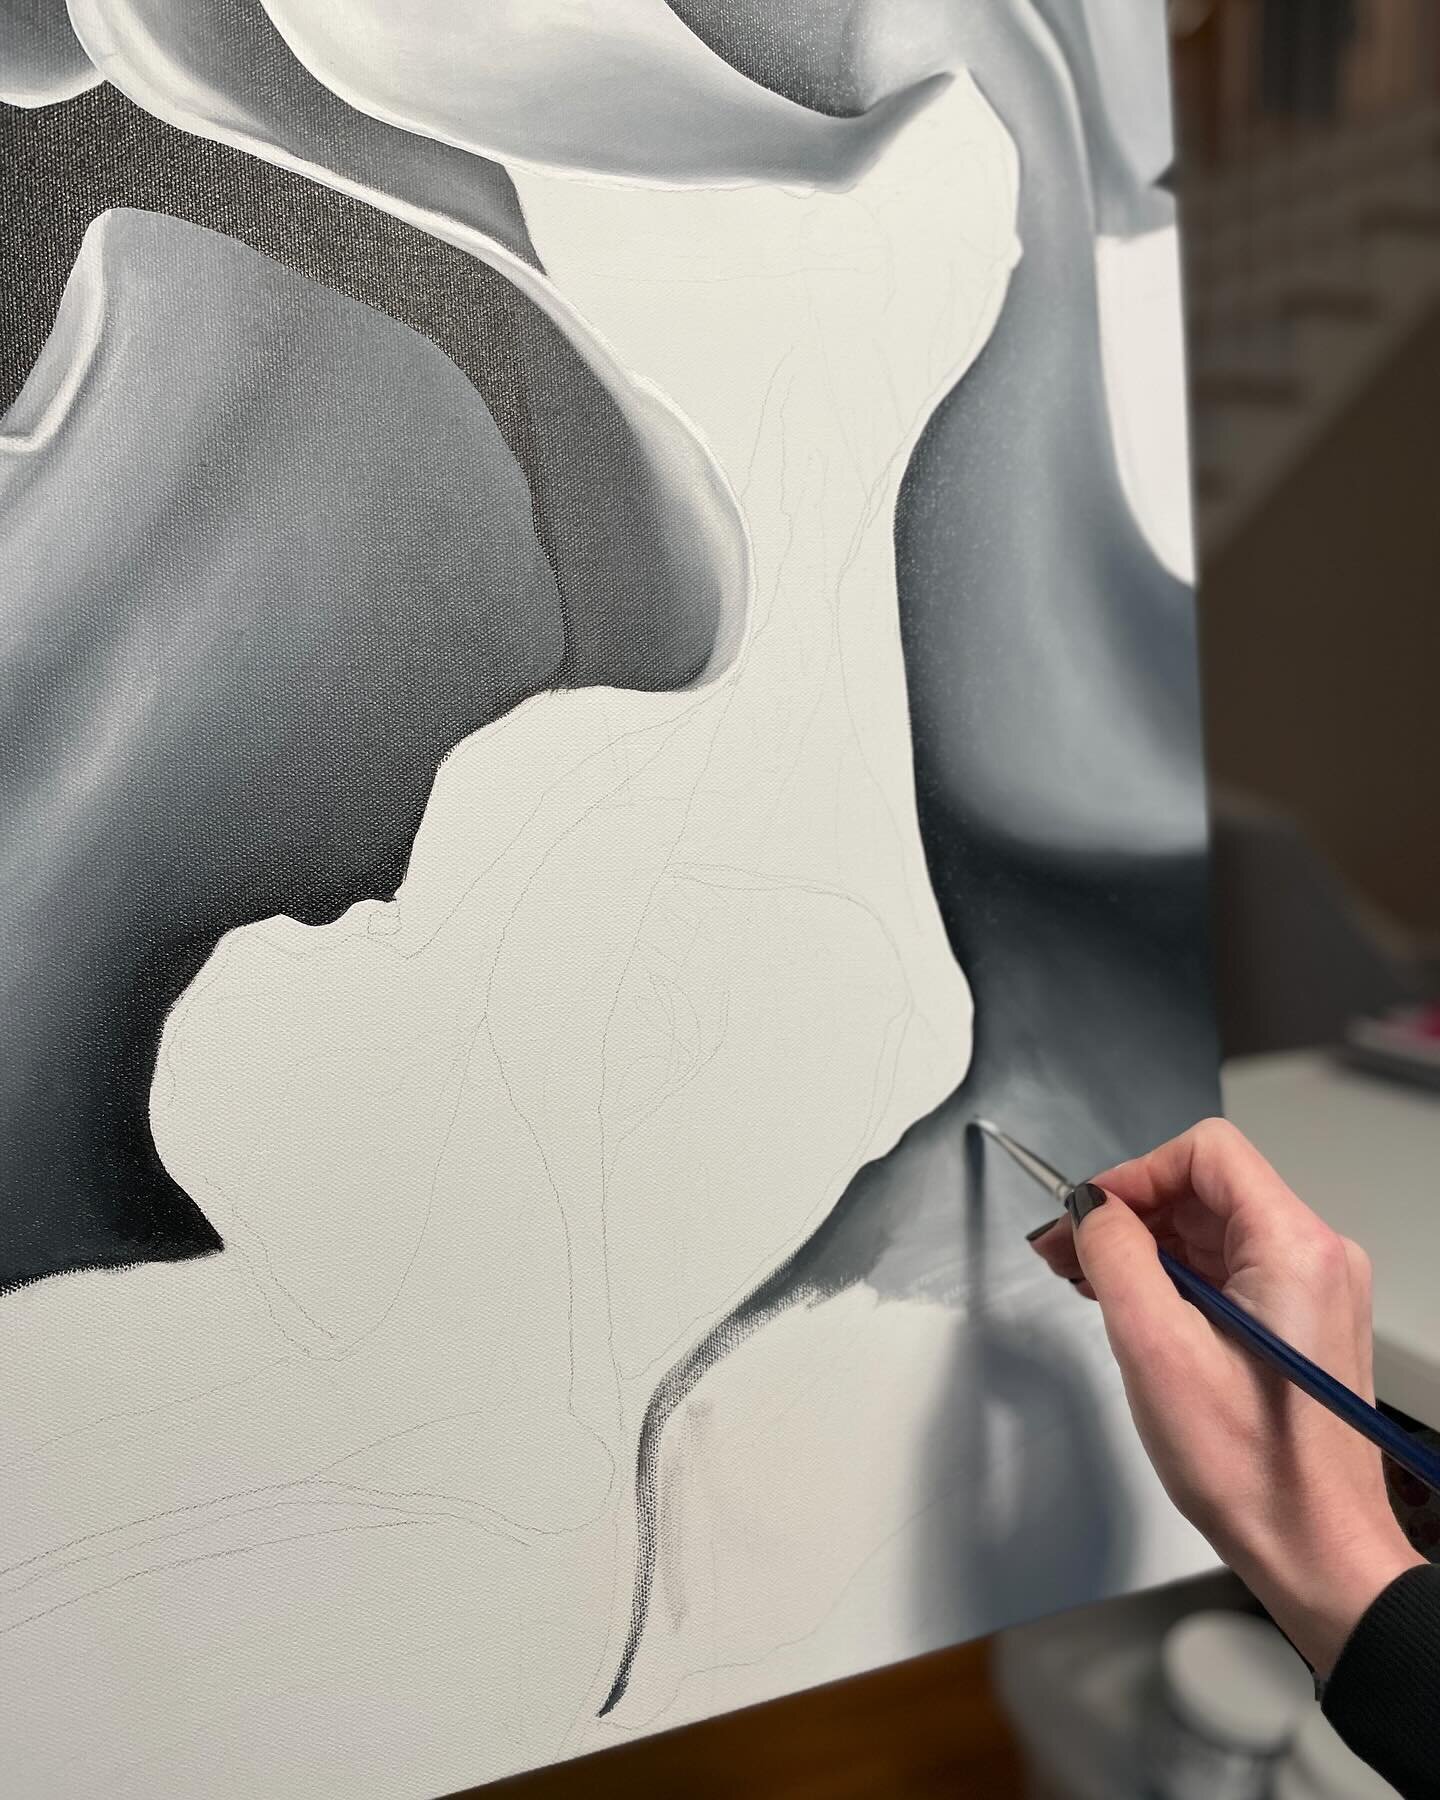 Chipping away at this painting.  It&rsquo;s all about the lines and the curves and the darks and the lights in this piece. I feel when I paint in black and white, the form of the flower shines because it can&rsquo;t hide behind bright color.  In a wa